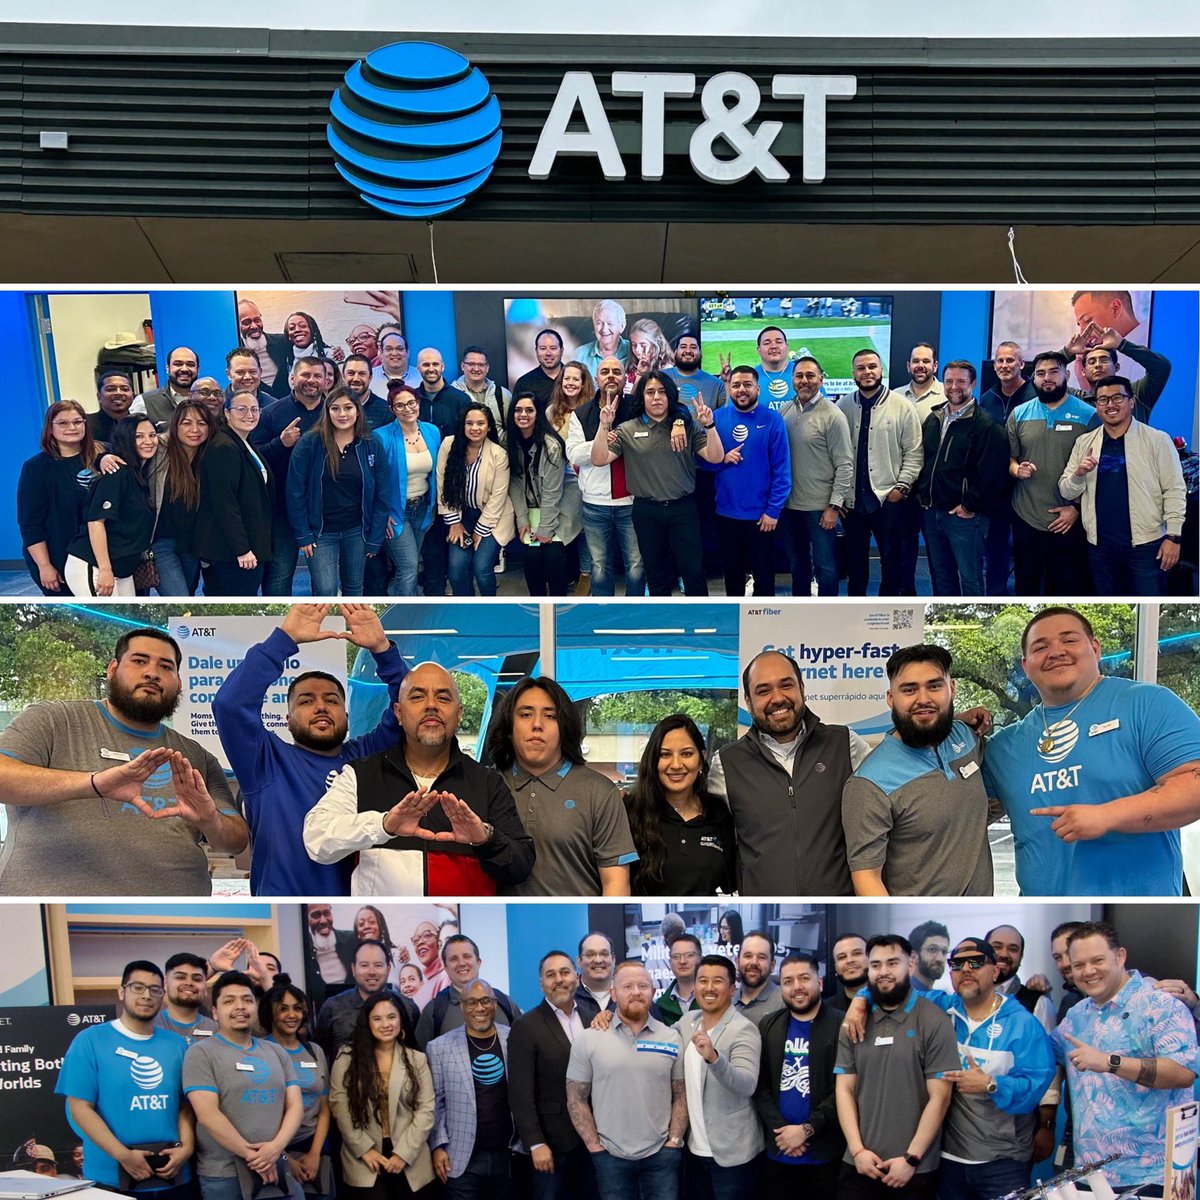 Not 1 but 2 GRAND Openings this week from Cell Shop and @AT&T! 🎉📱🙌 They say everything is bigger in Texas, so are the celebrations! Excited for our teams out there. Let's GOOOOOO! #CellShop #ATT #CellSellSale 🤖💻📲